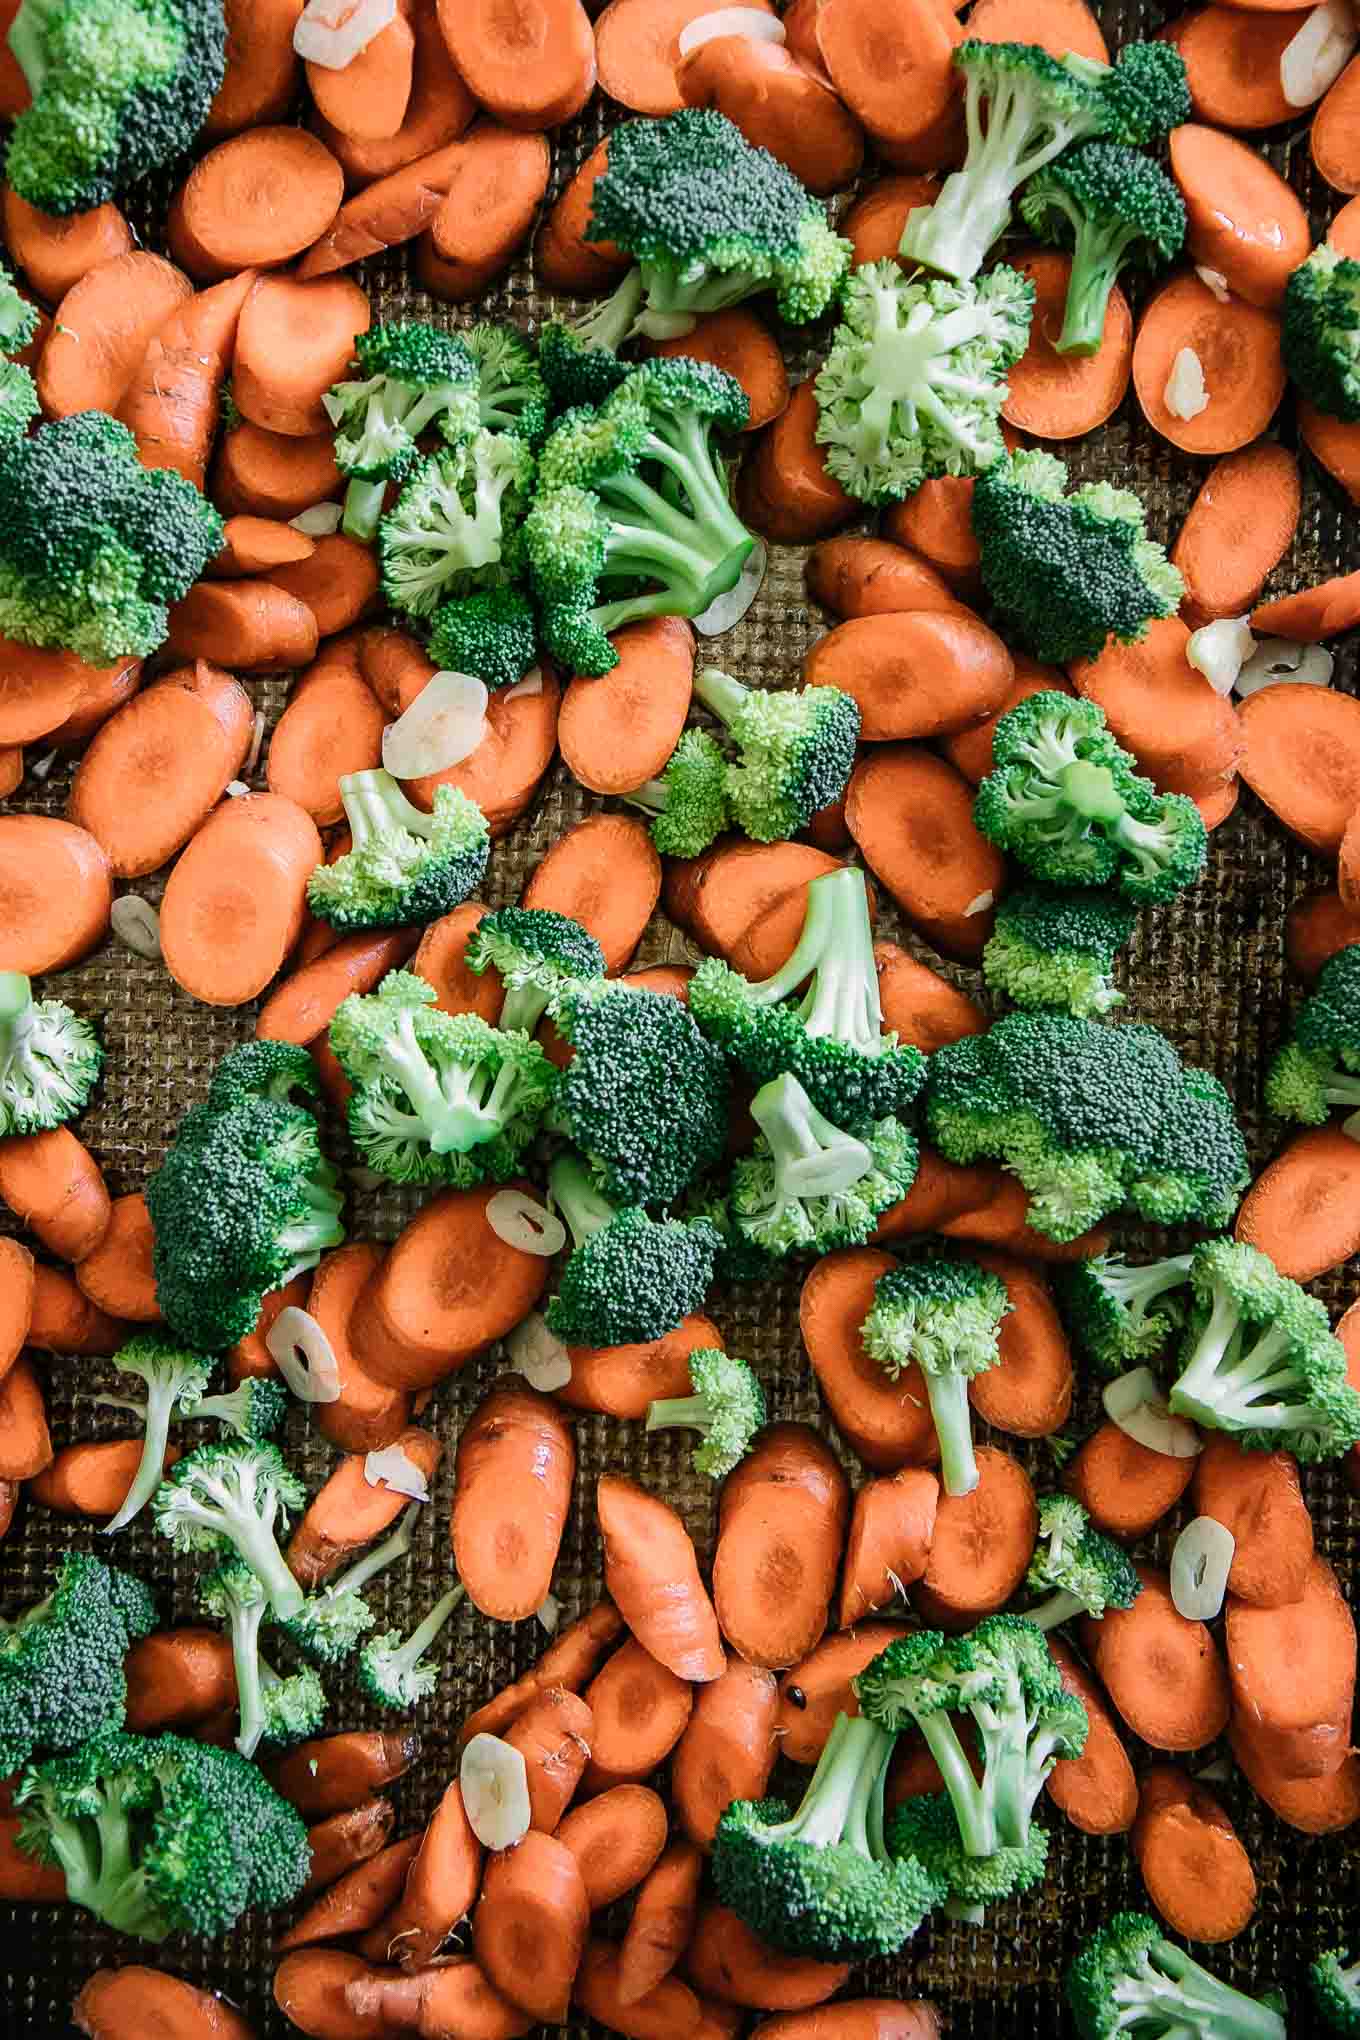 Roasted Broccoli and Carrots ⋆ 5 Ingredients, 30 Minutes, Super Tasty!